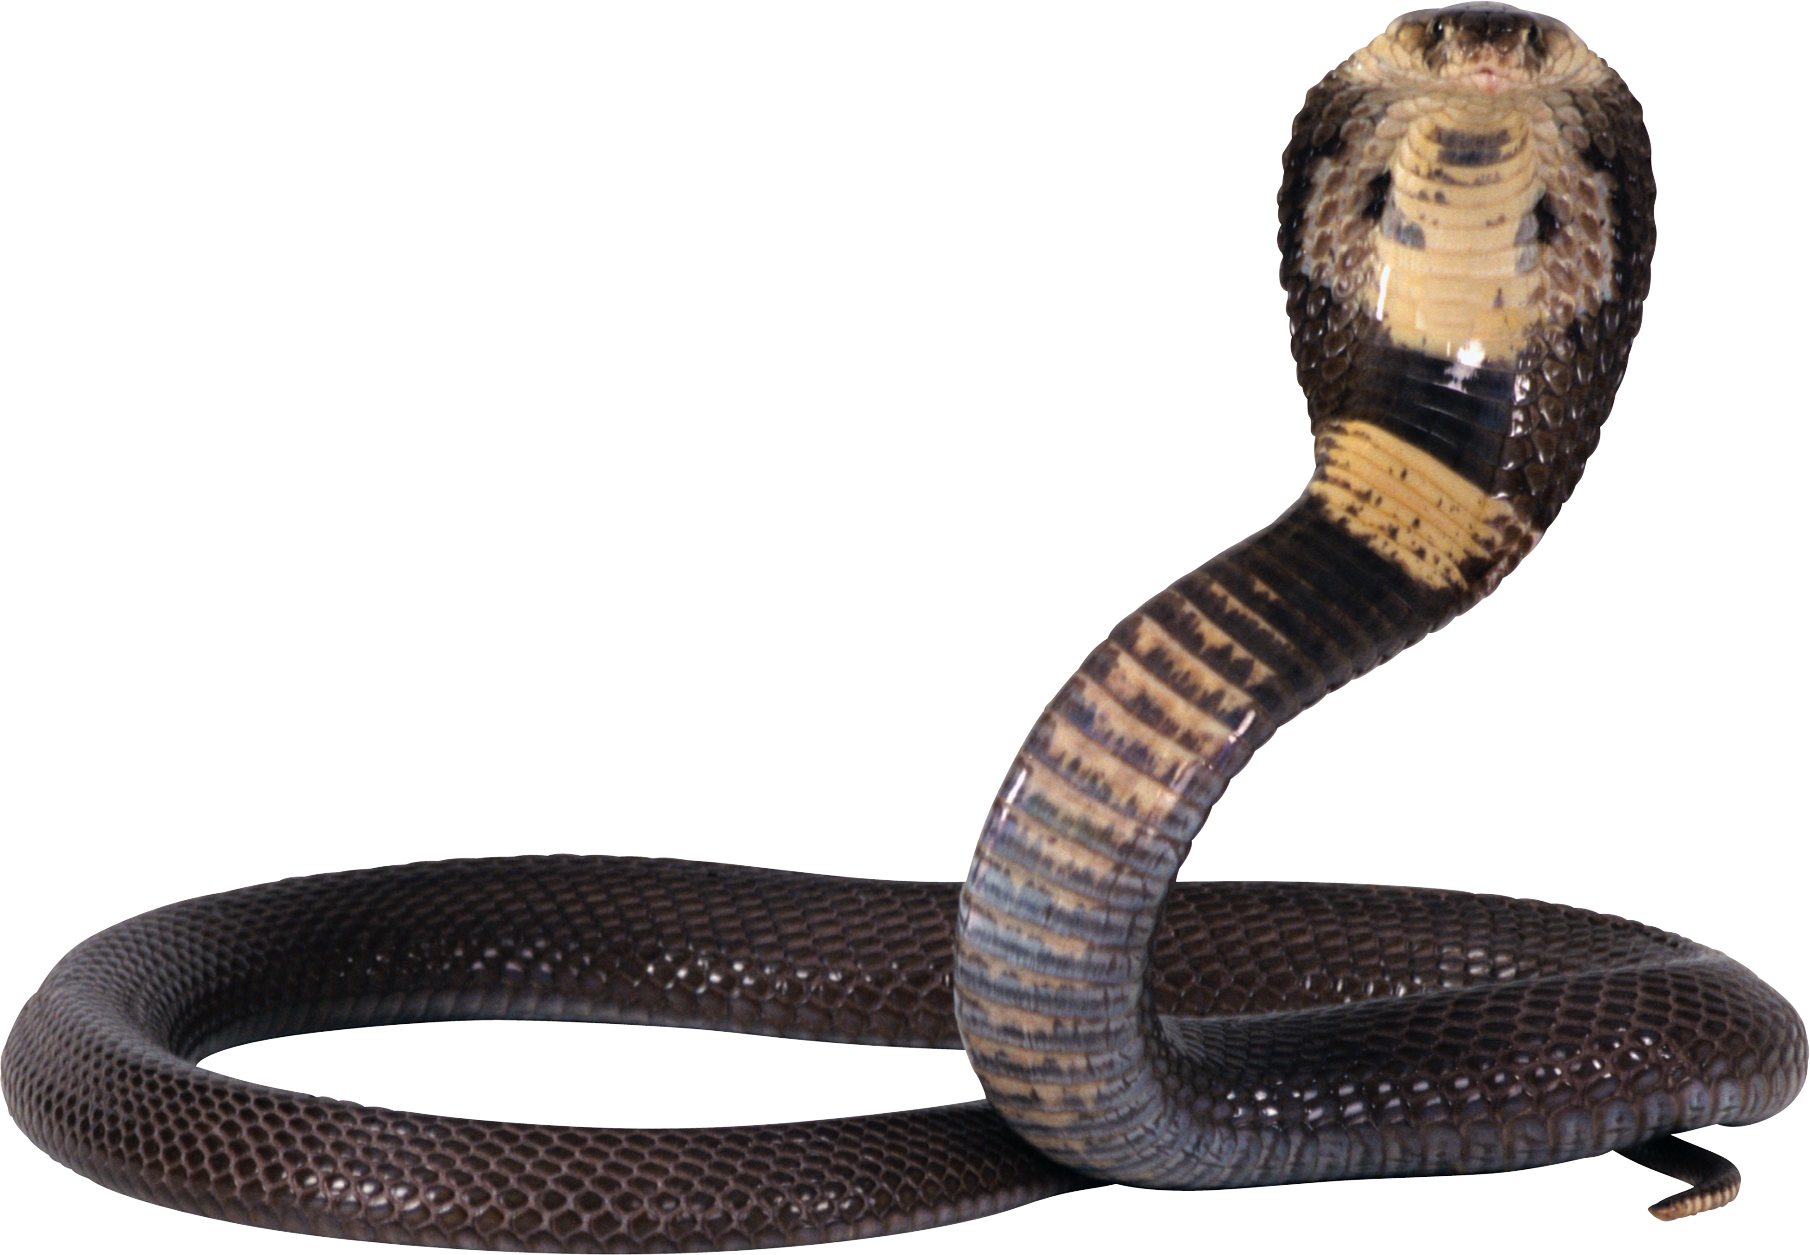 Cobra snake PNG image, free download picture